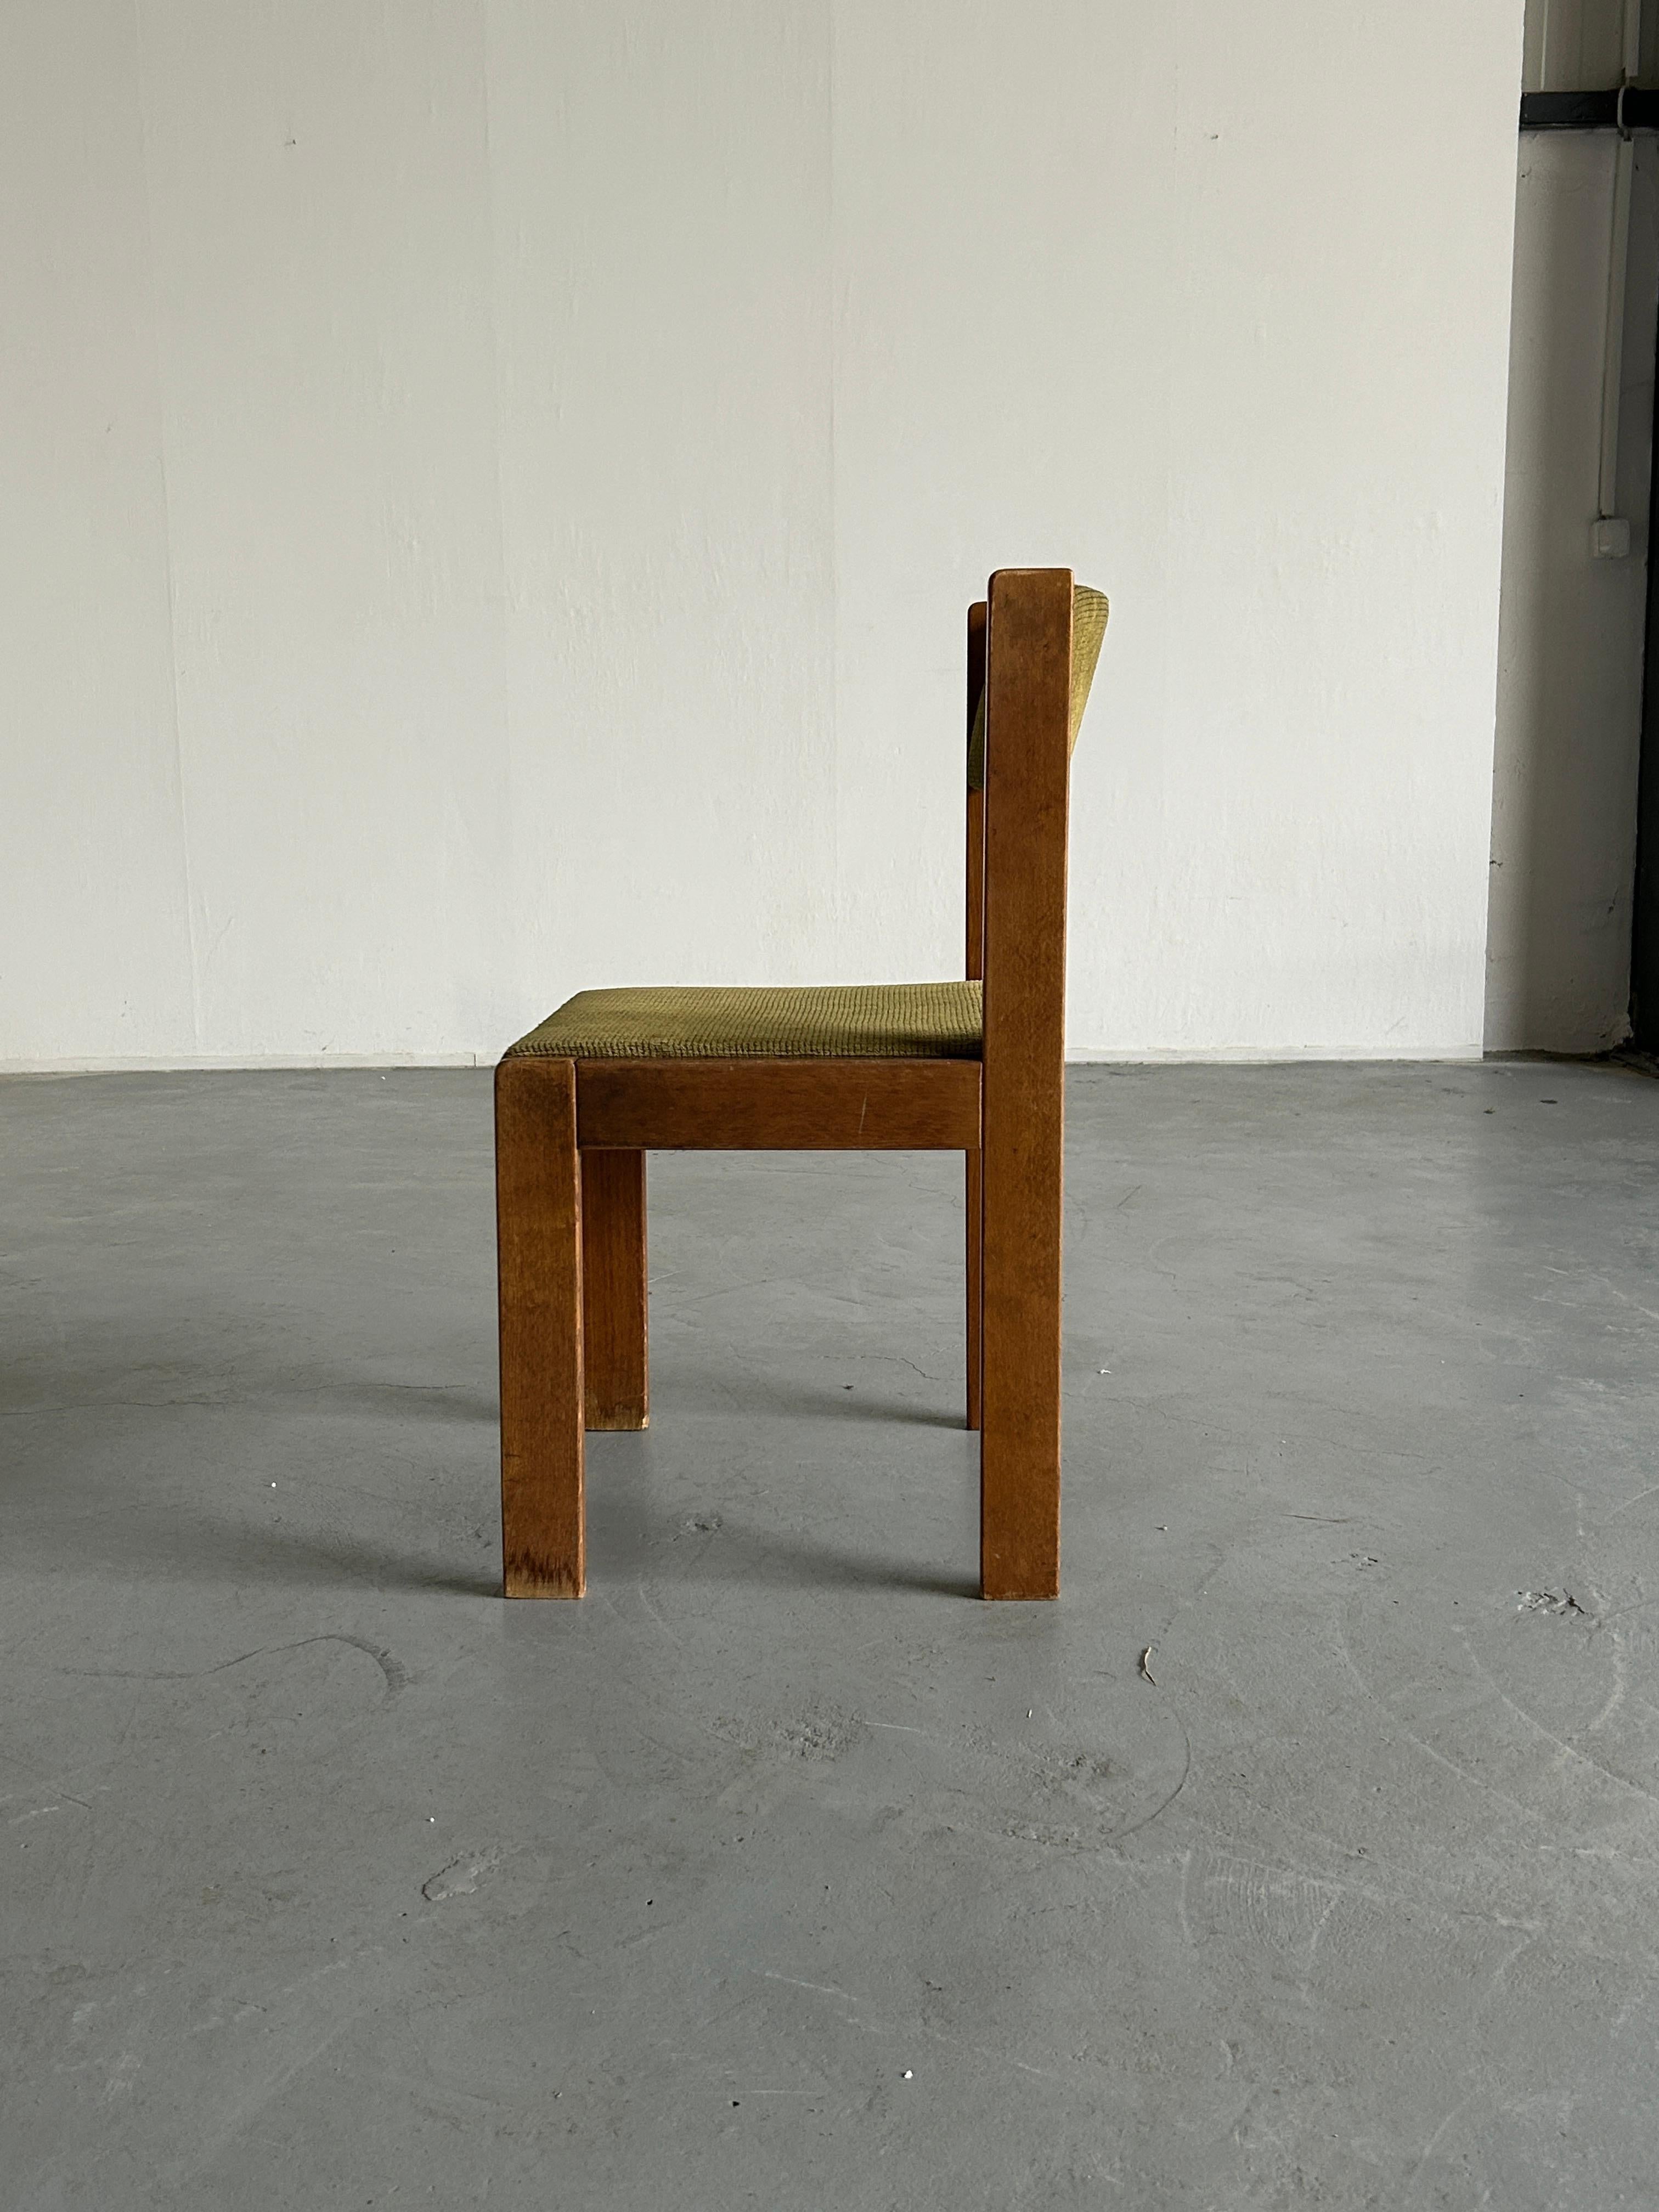 Upholstery Mid-Century Modern Constructivist Dining Chair by Wiesner Hager, 1960s Austria For Sale